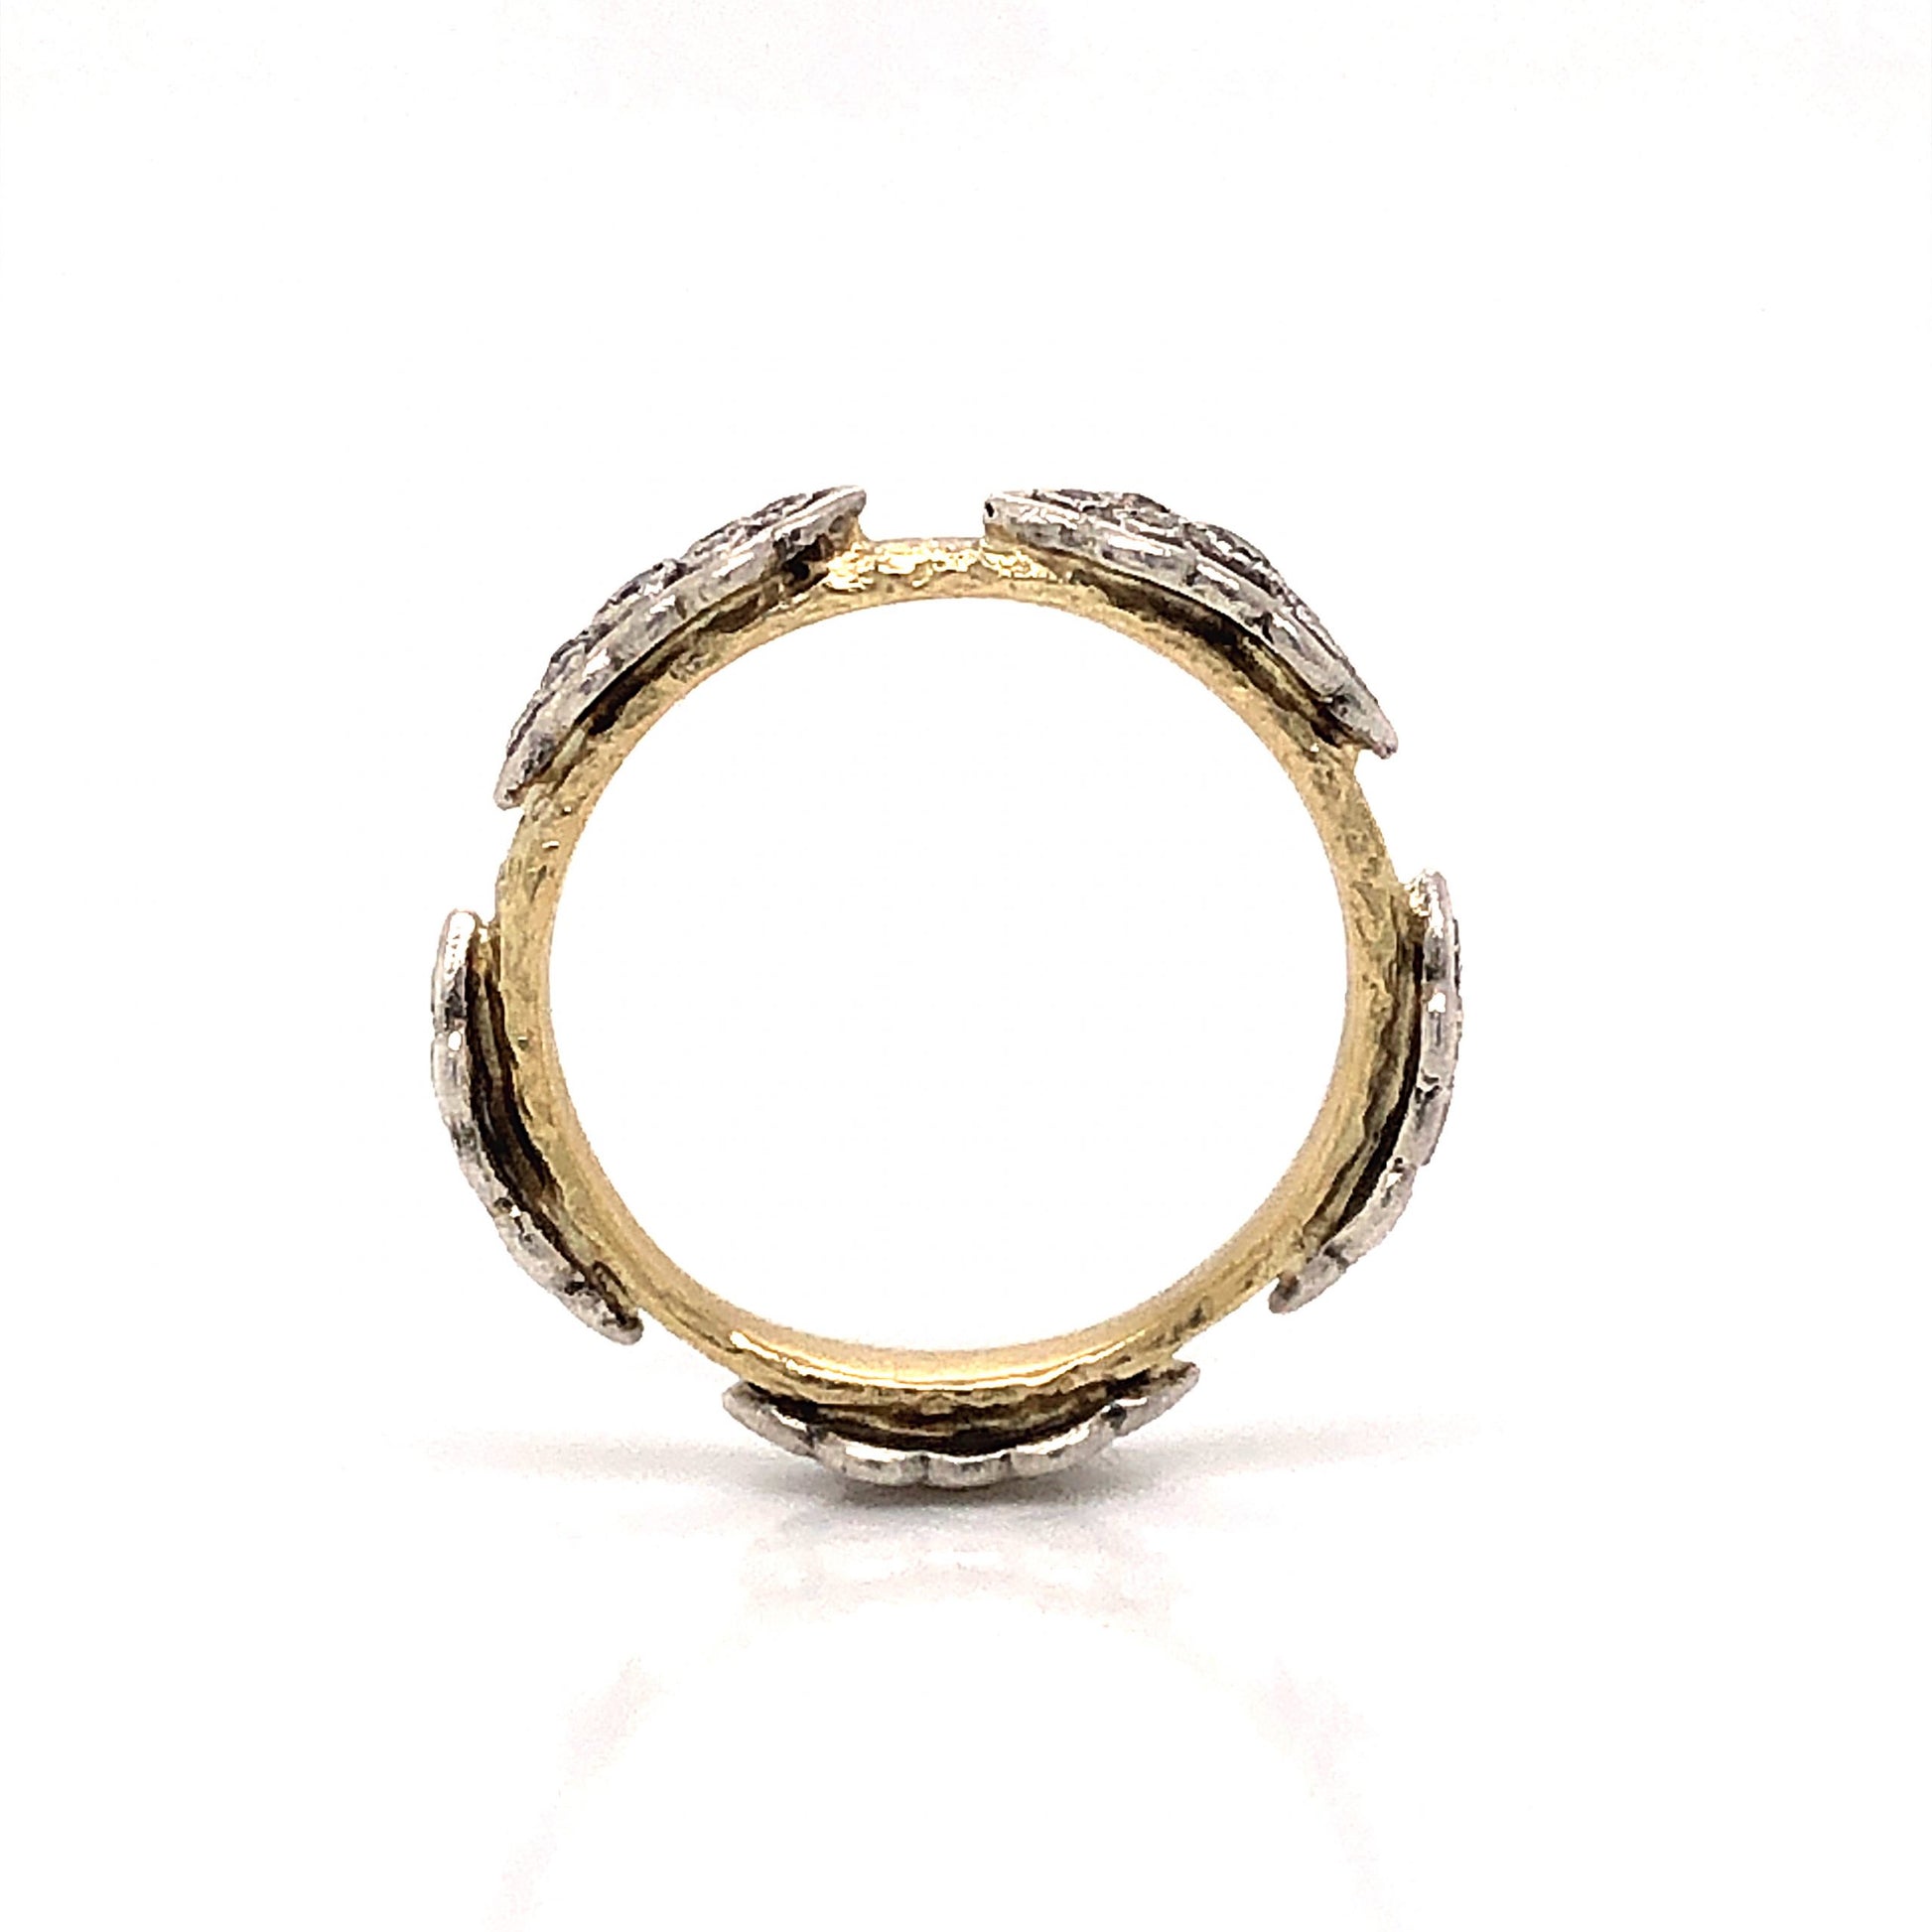 Armenta Diamond Stacking Ring in Silver & 18k GoldComposition: 18 Karat Yellow Gold/Sterling SilverRing Size: 6.5Total Diamond Weight: .225 ctTotal Gram Weight: 3.8 gInscription: Armenta 18k J 925 MADE IN USA